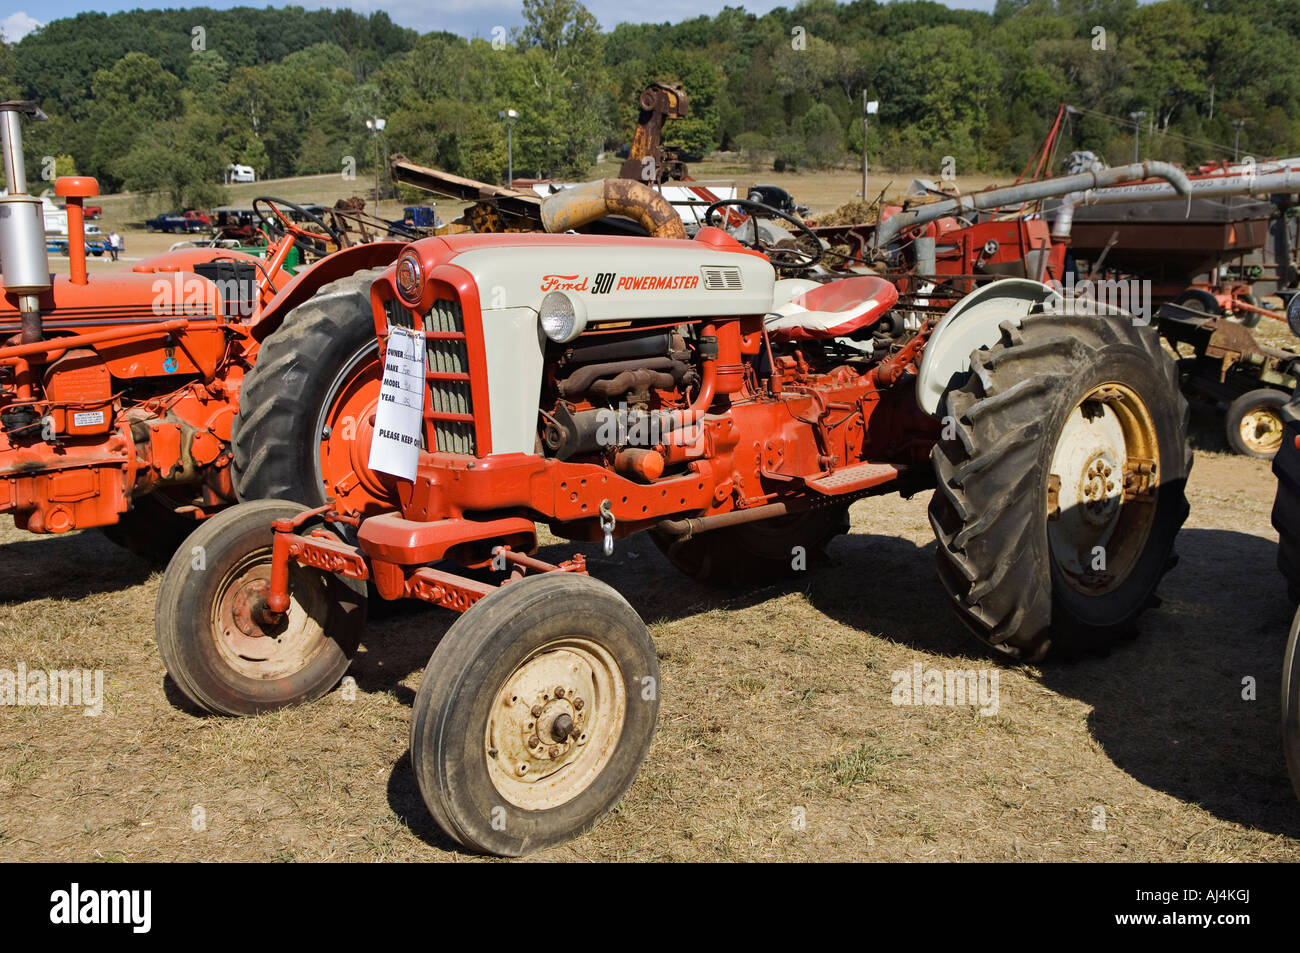 Antique 1956 Ford 901 Powermaster Tractor on Display at Heritage Festival Lanesville Indiana Stock Photo